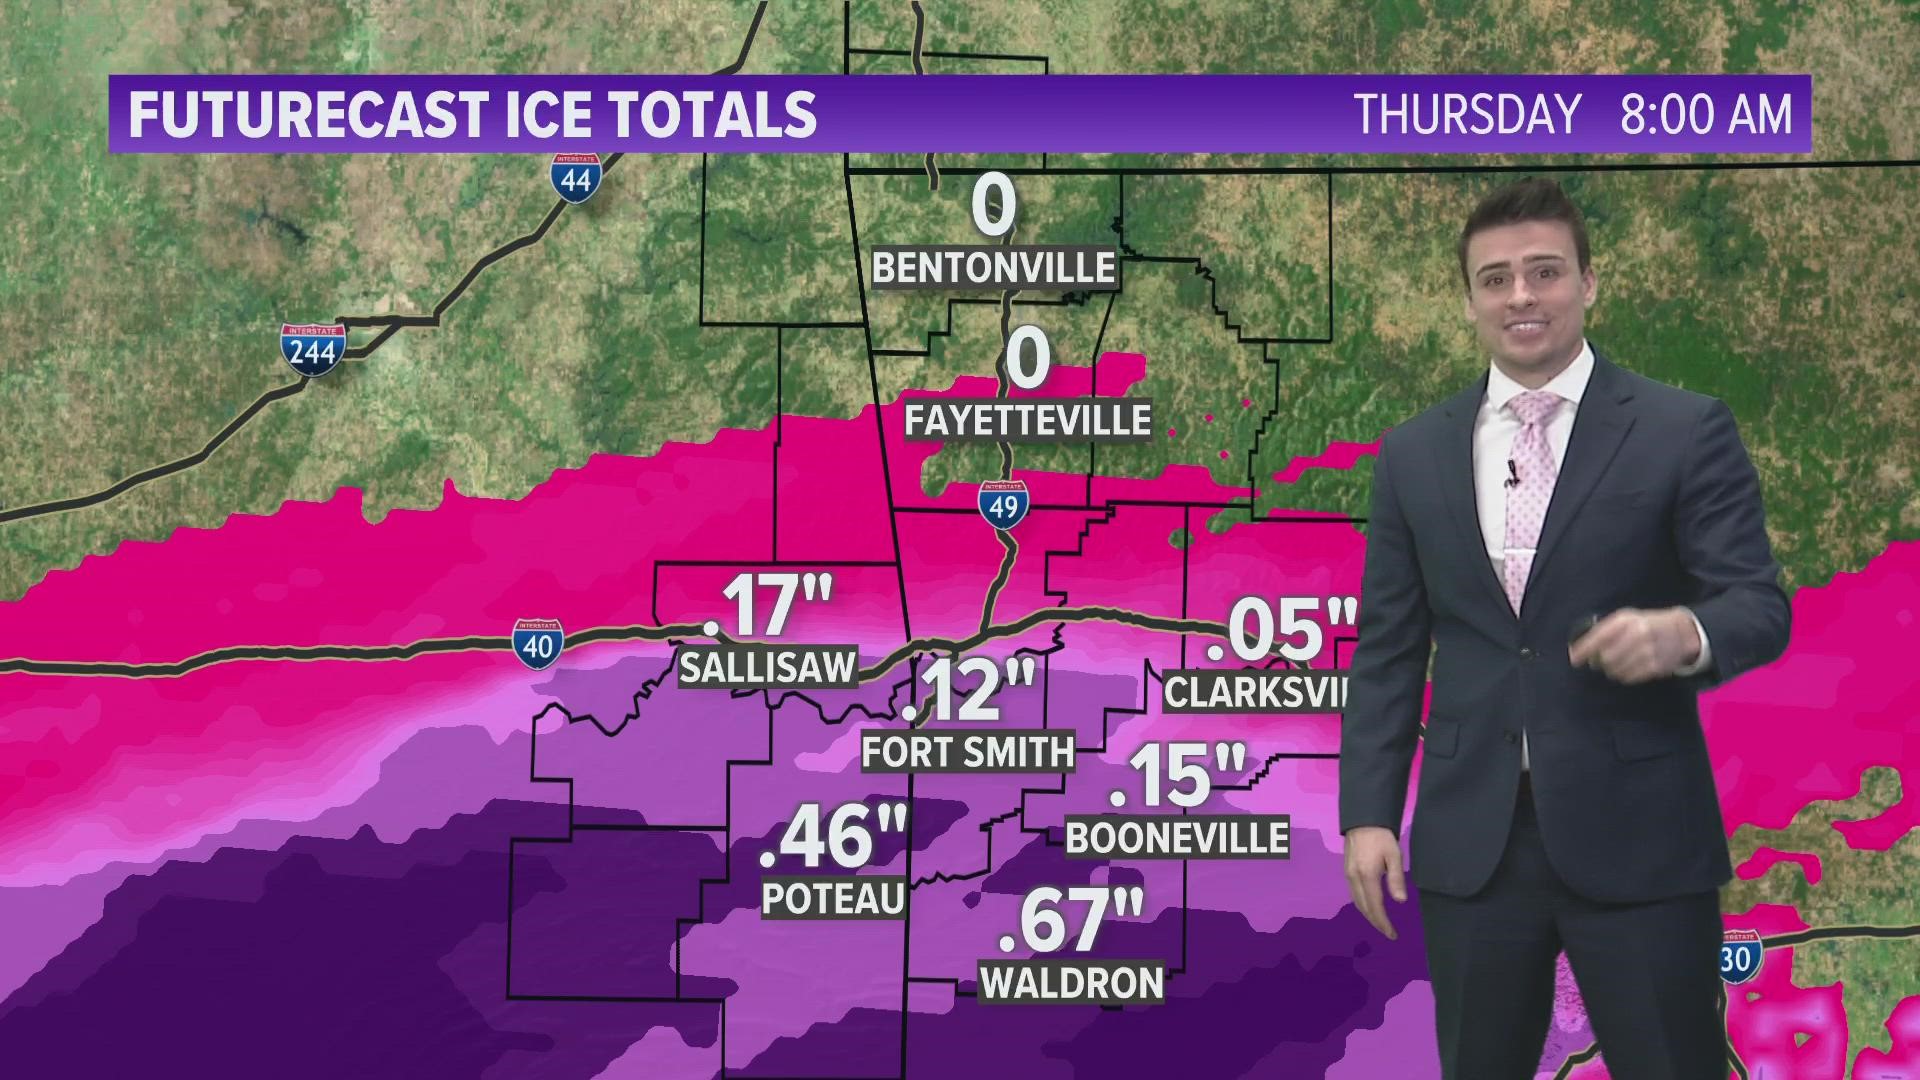 One more winter storm system will hit Arkansas this week, bringing ice and sleet. Heavy ice is possible in the southern River Valley into the Ouachitas.